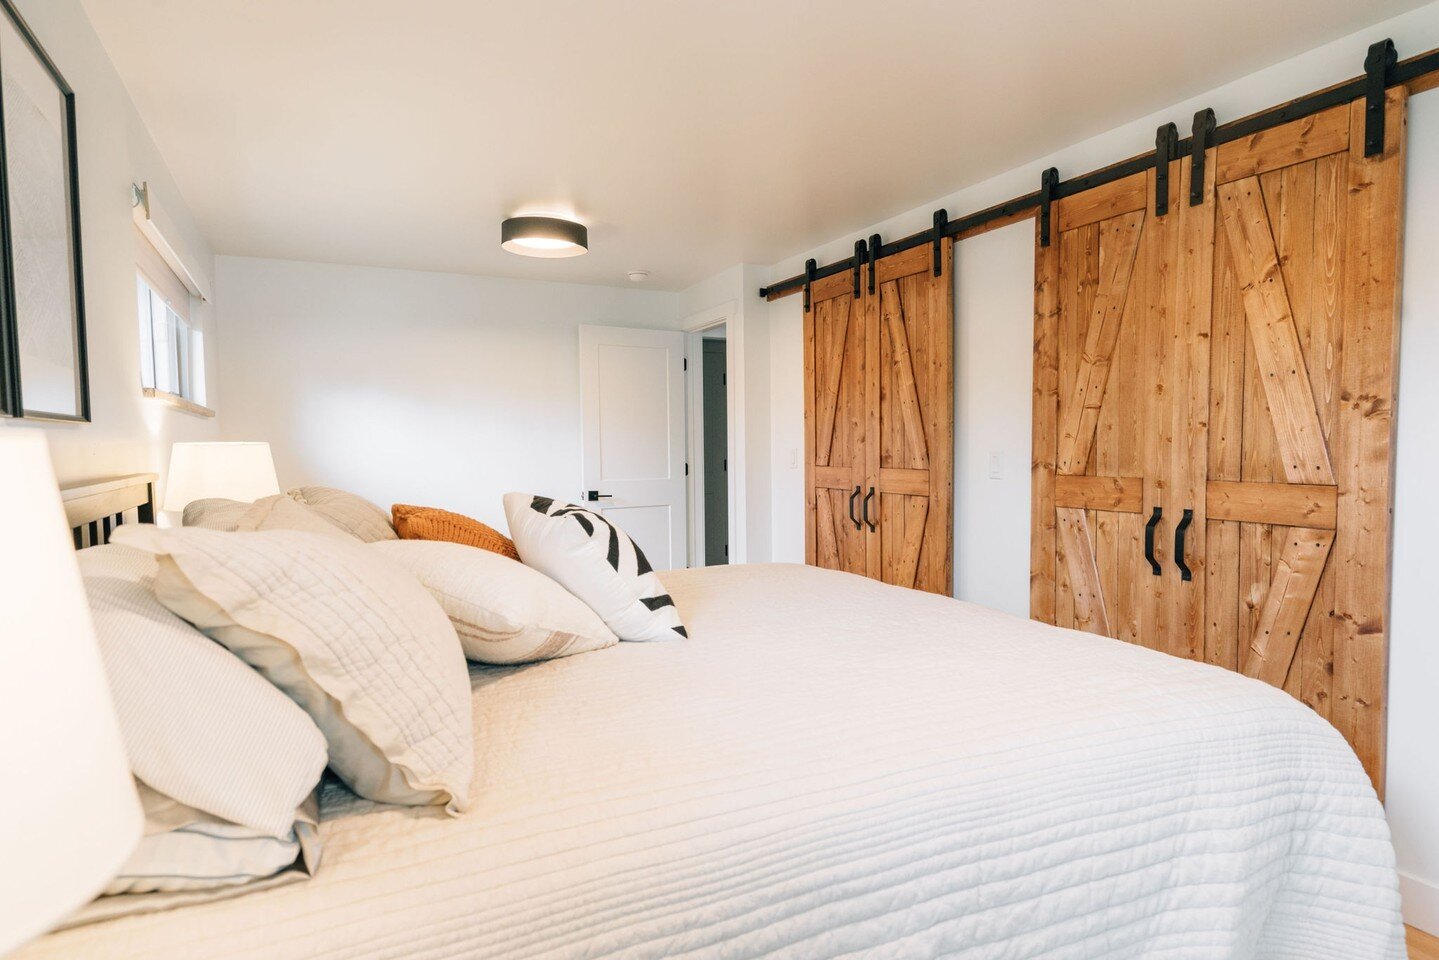 In this primary suite, we were challenged to use space wisely. To get this couple his and hers closets, we suggested barn-style doors to maximize visual impact and get easy-to-open access.

#denverdesigner #primarysuite #closetinspo #closetswelove #b